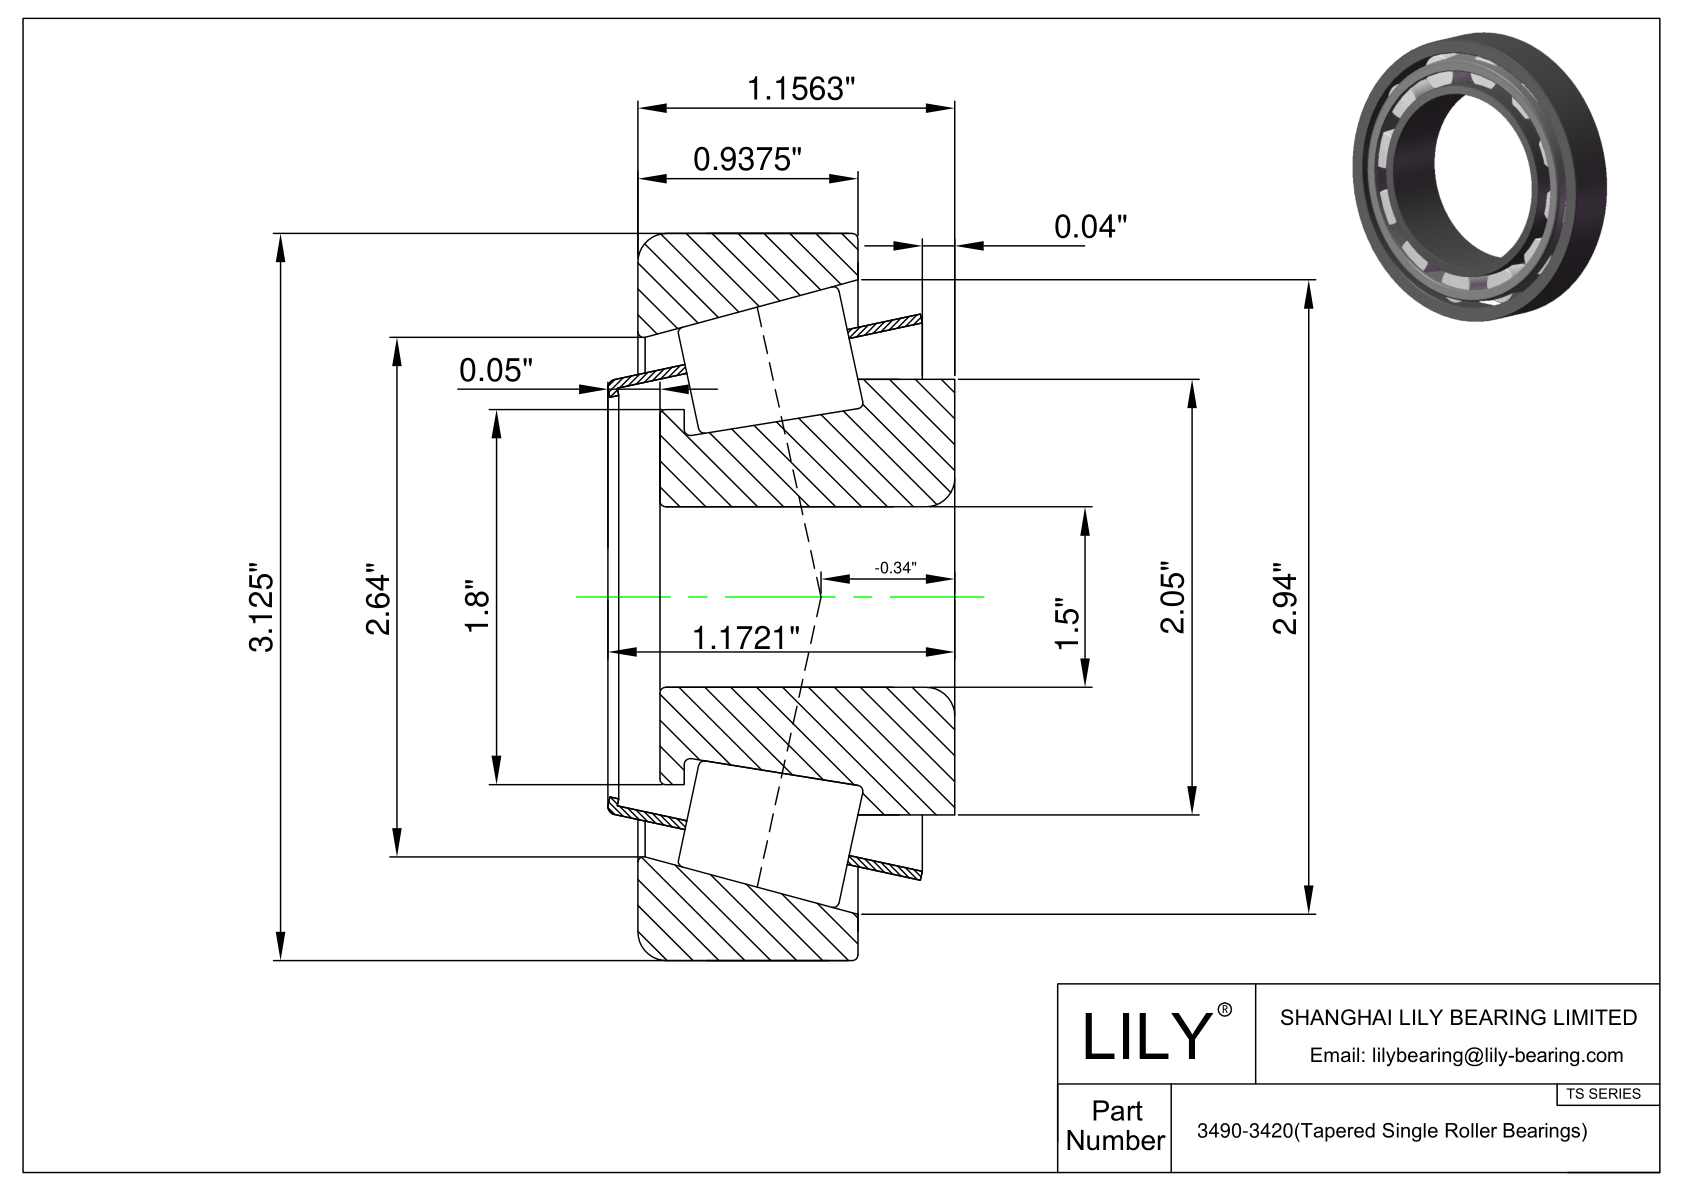 3490-3420 TS (Tapered Single Roller Bearings) (Imperial) cad drawing